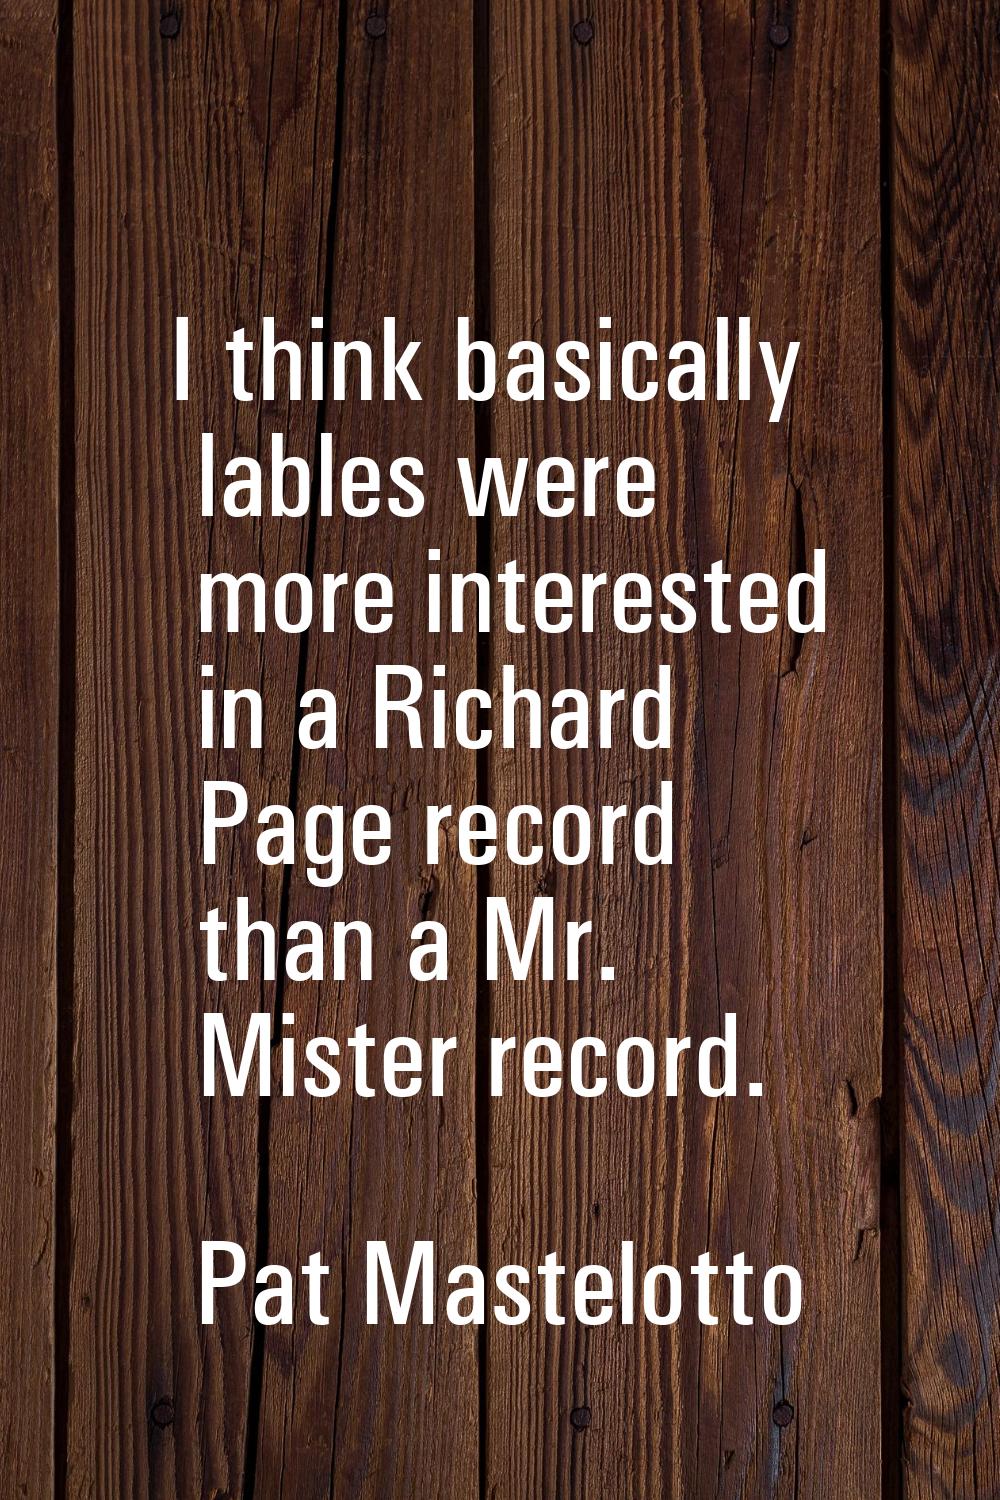 I think basically lables were more interested in a Richard Page record than a Mr. Mister record.